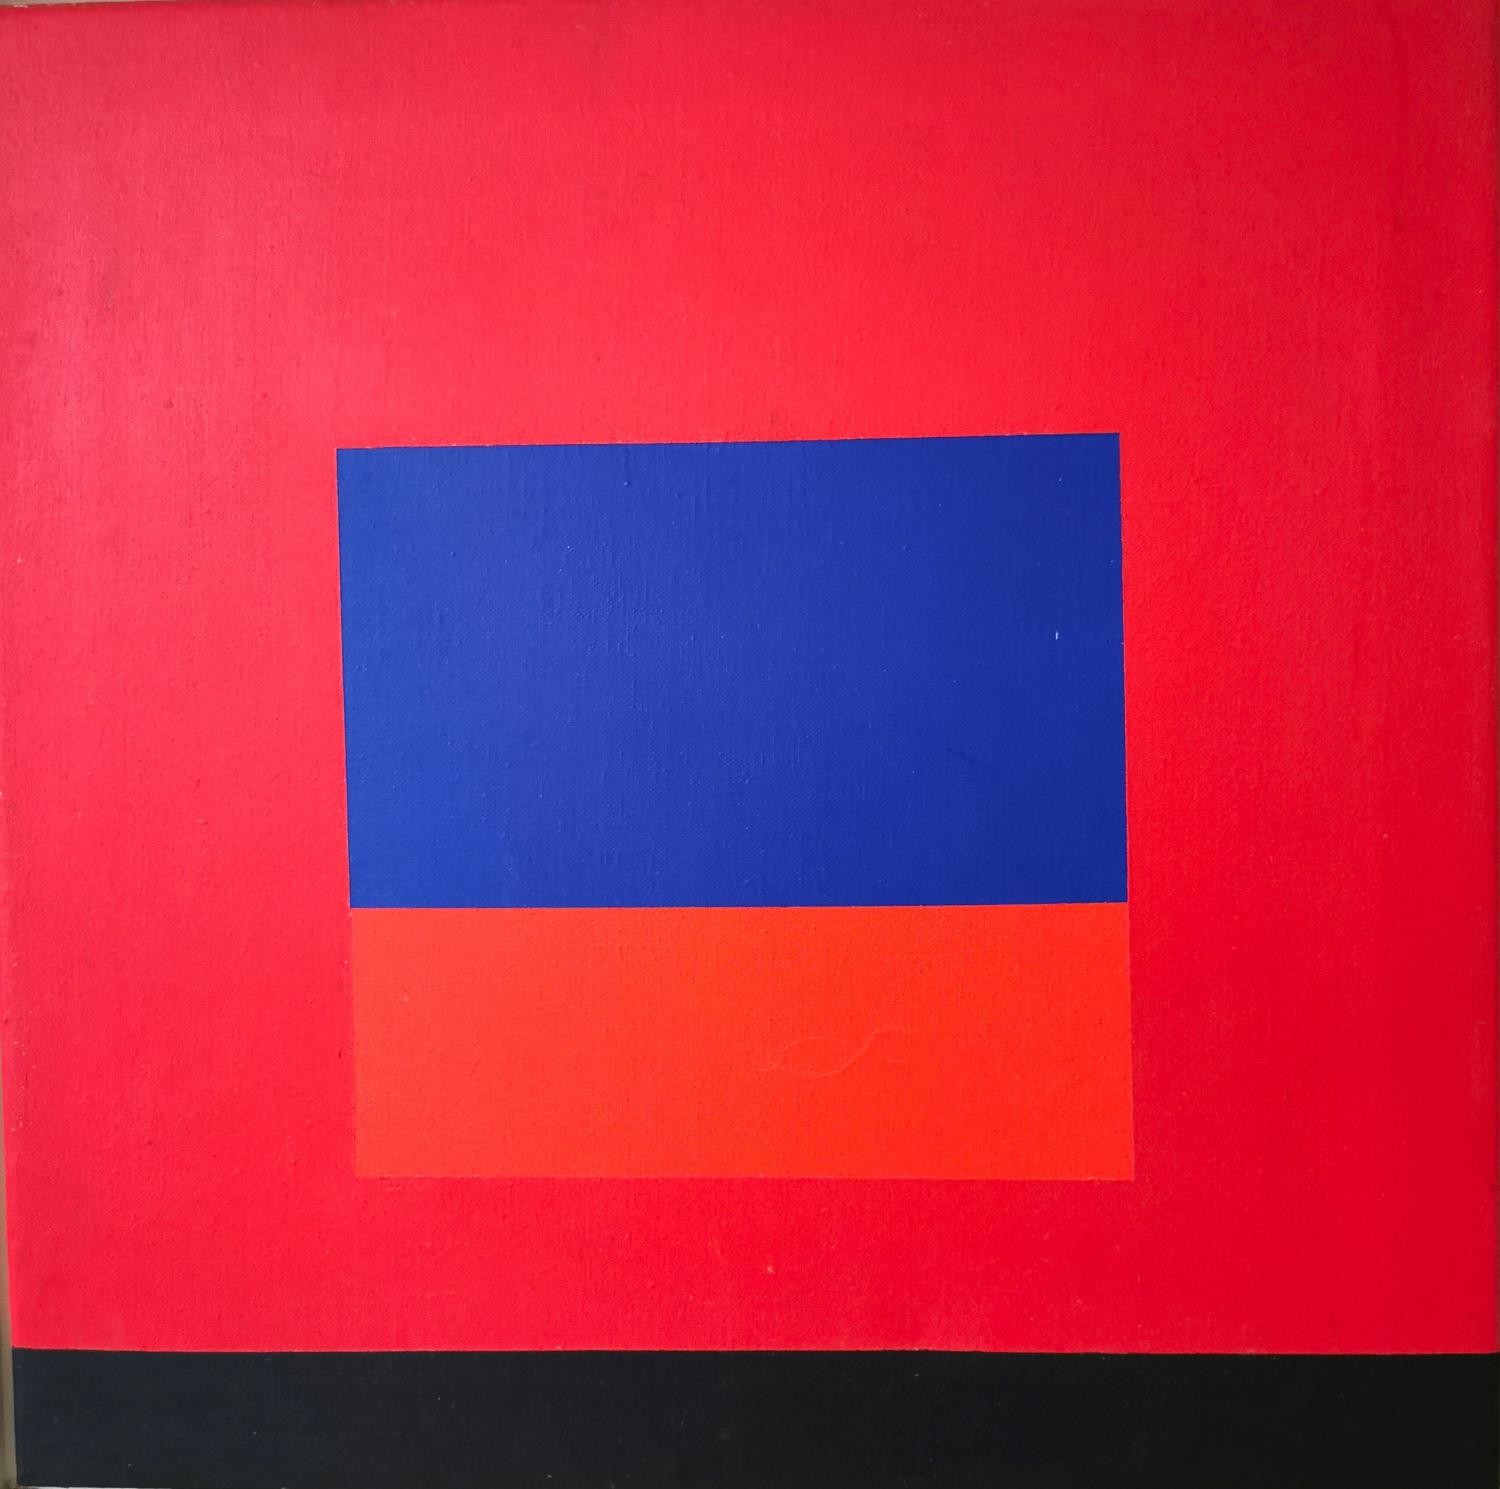 John Holden, British, (1942-), oil on canvas, block colour composition red, blue and black, titled